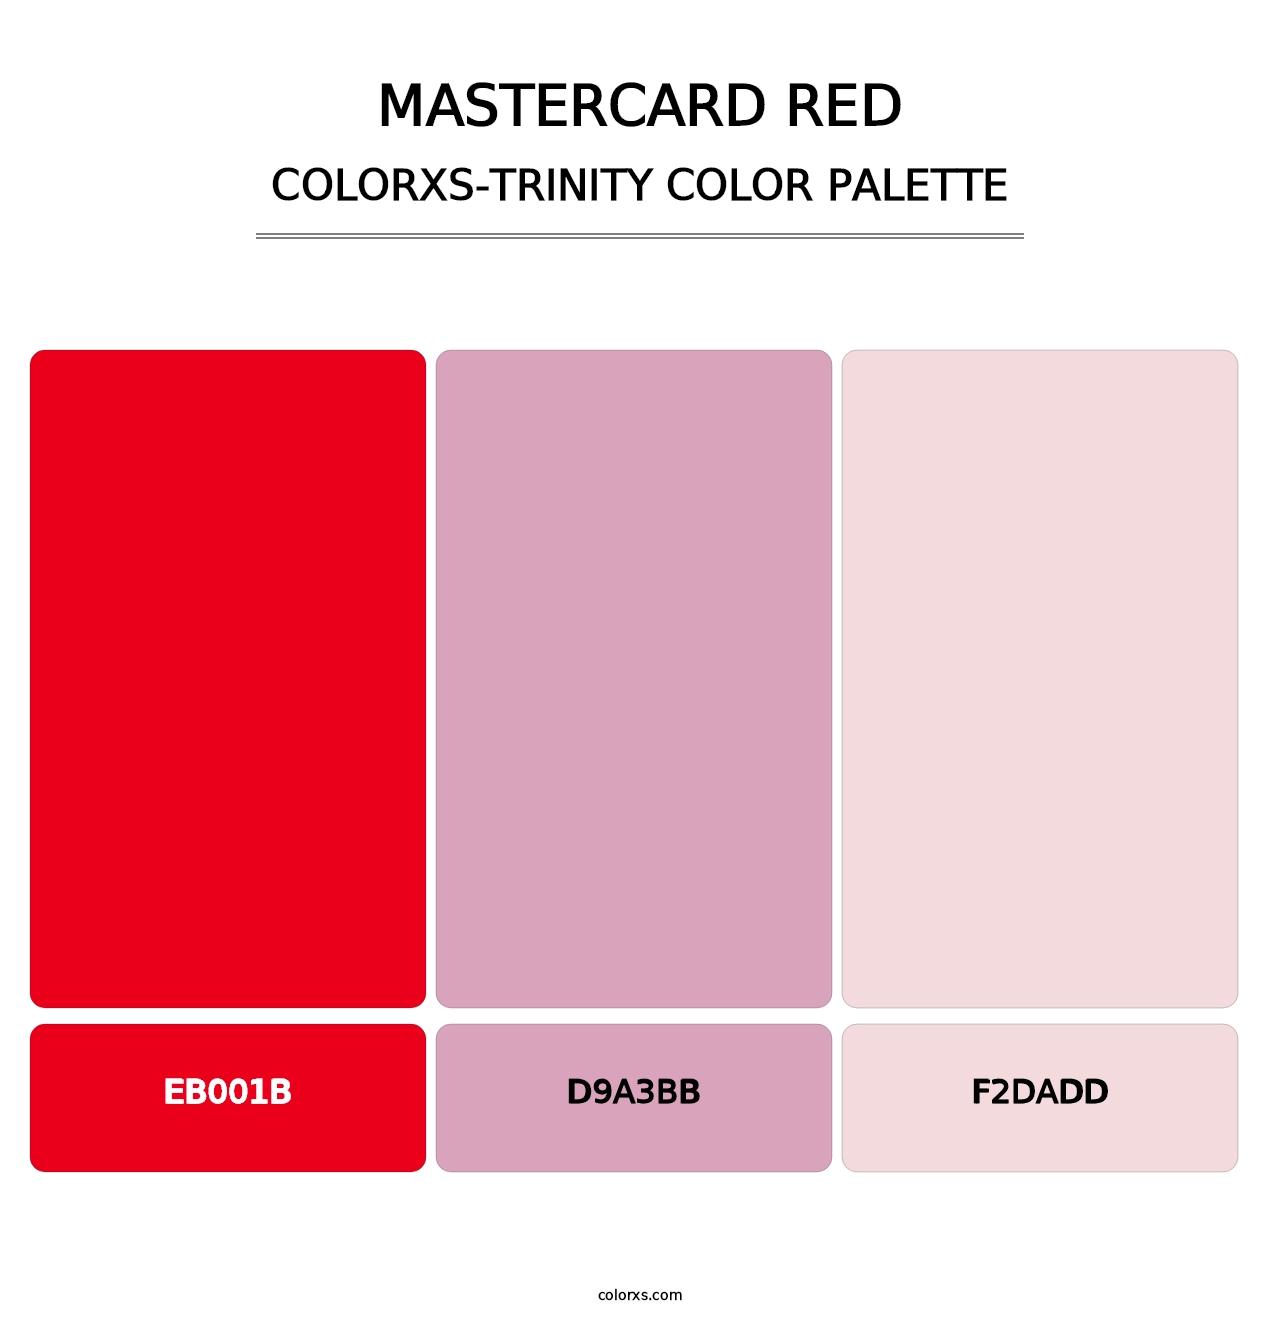 Mastercard Red - Colorxs Trinity Palette